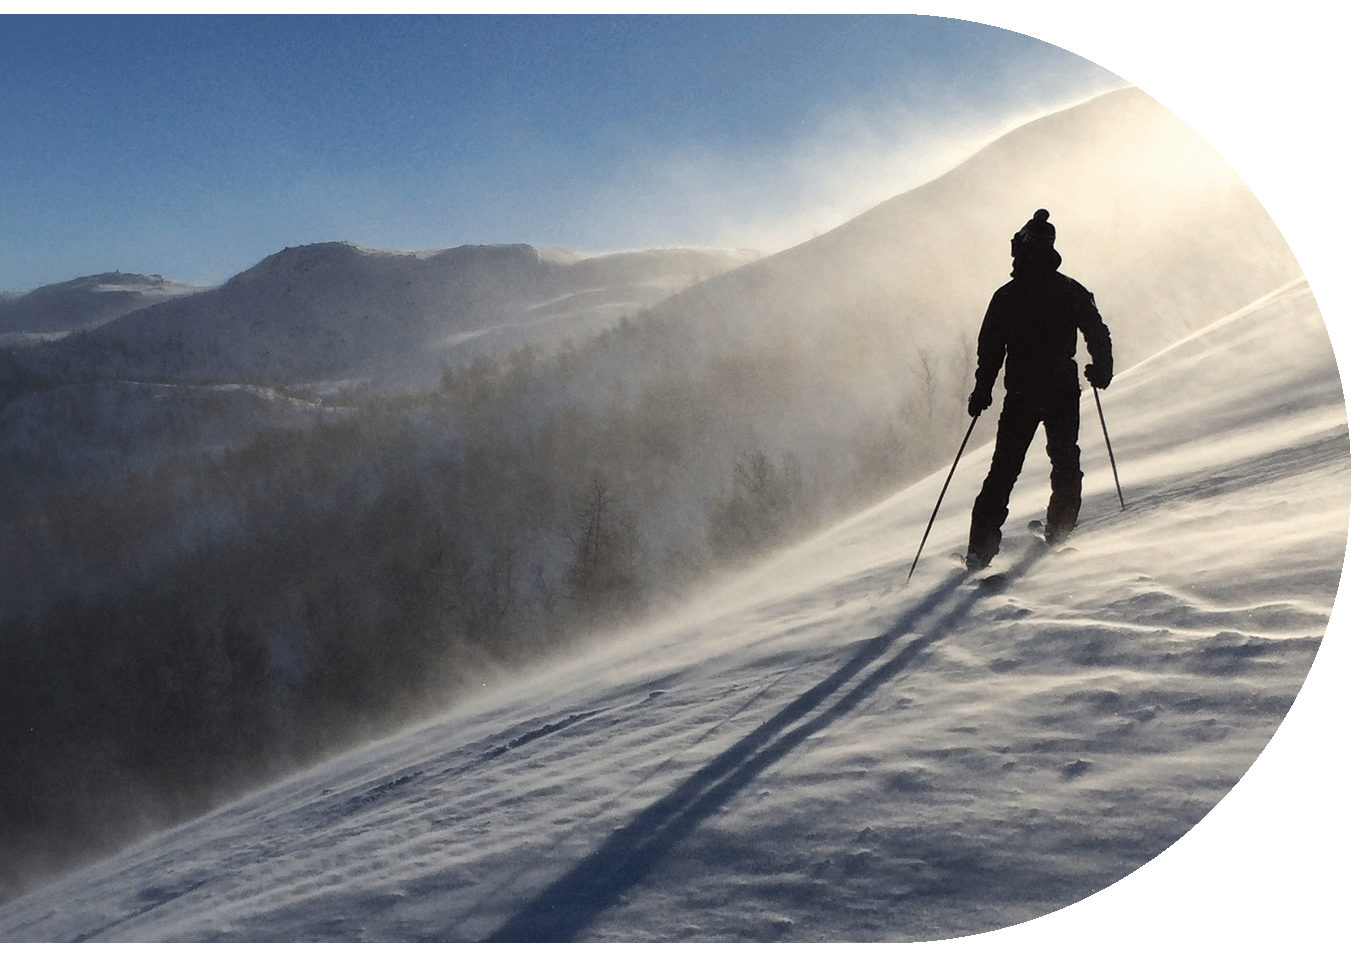 Skier standing atop a snowy mountain